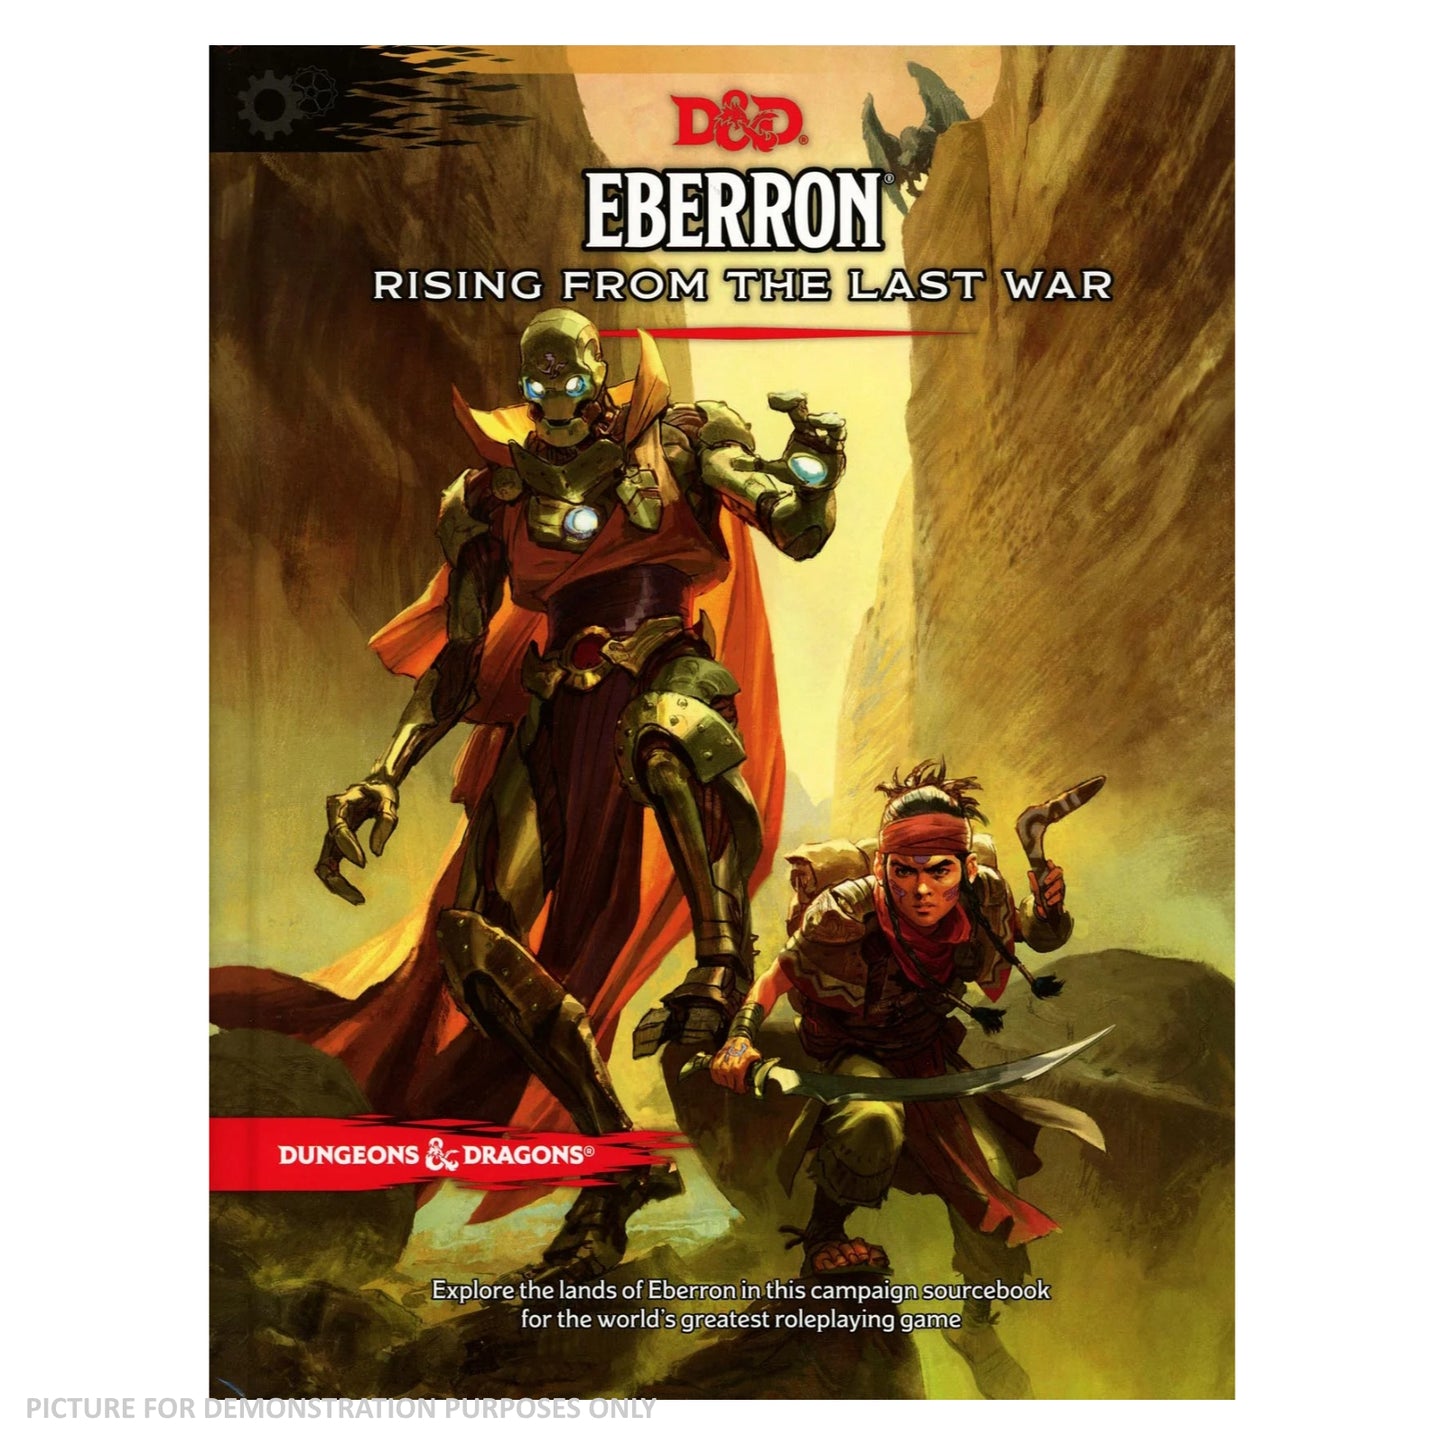 Dungeons & Dragons Eberron Rising from the Last War